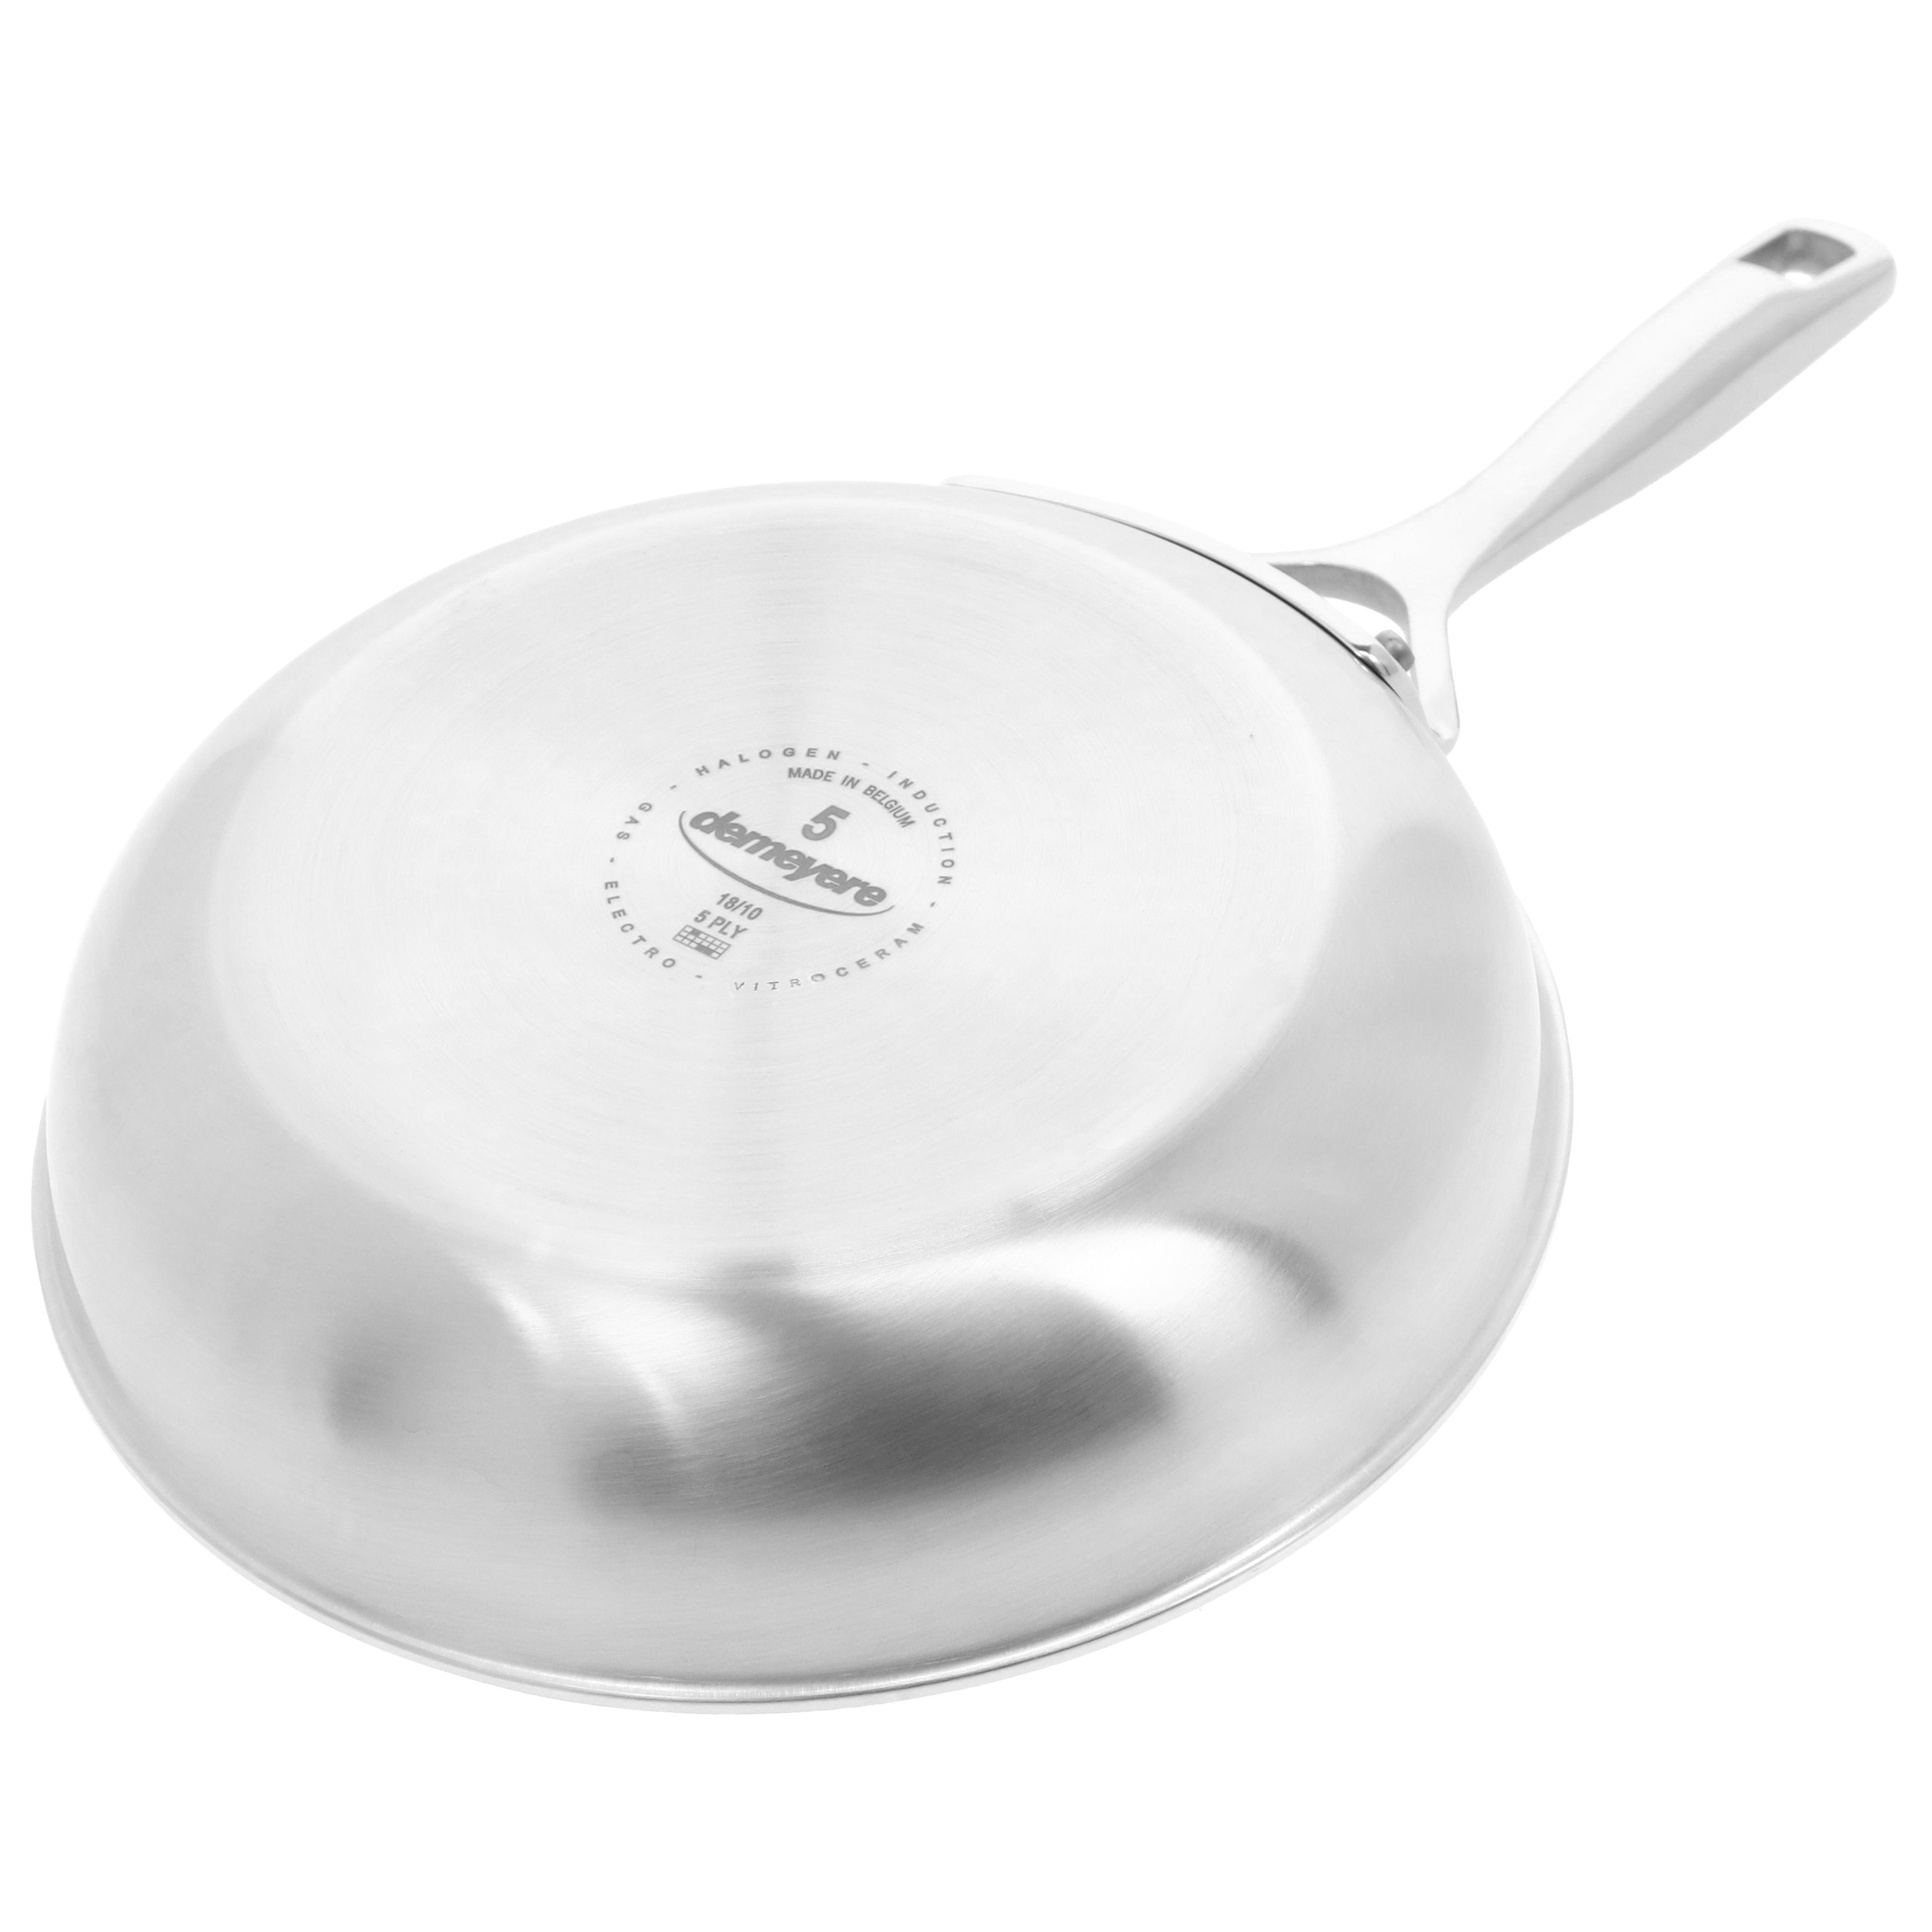 Demeyere Industry 5-Ply 8-inch Stainless Steel Fry Pan, 8-inch - Fred Meyer